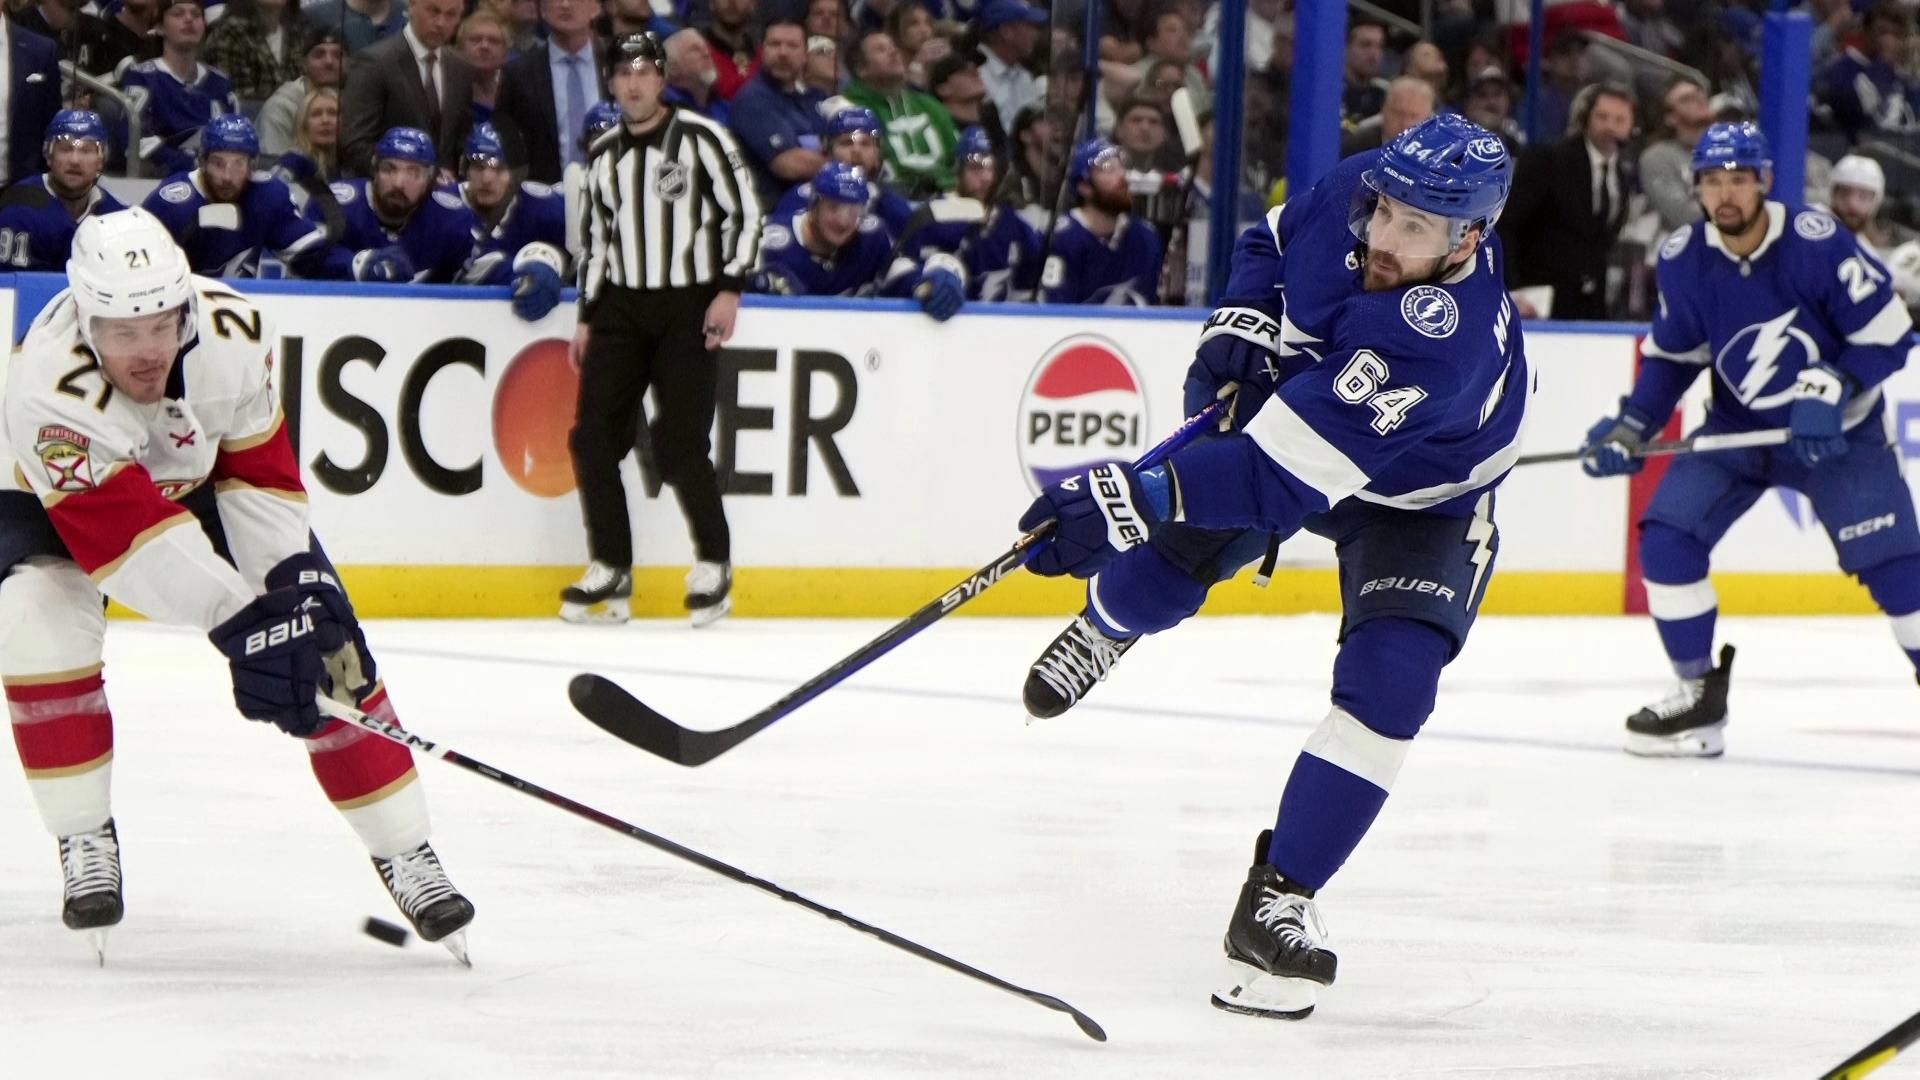 Tampa Bay appeared to tie it with 18 seconds left in the first, but Anthony Cirelli’s goal on the Lightning’s third power play was disallowed following video review.